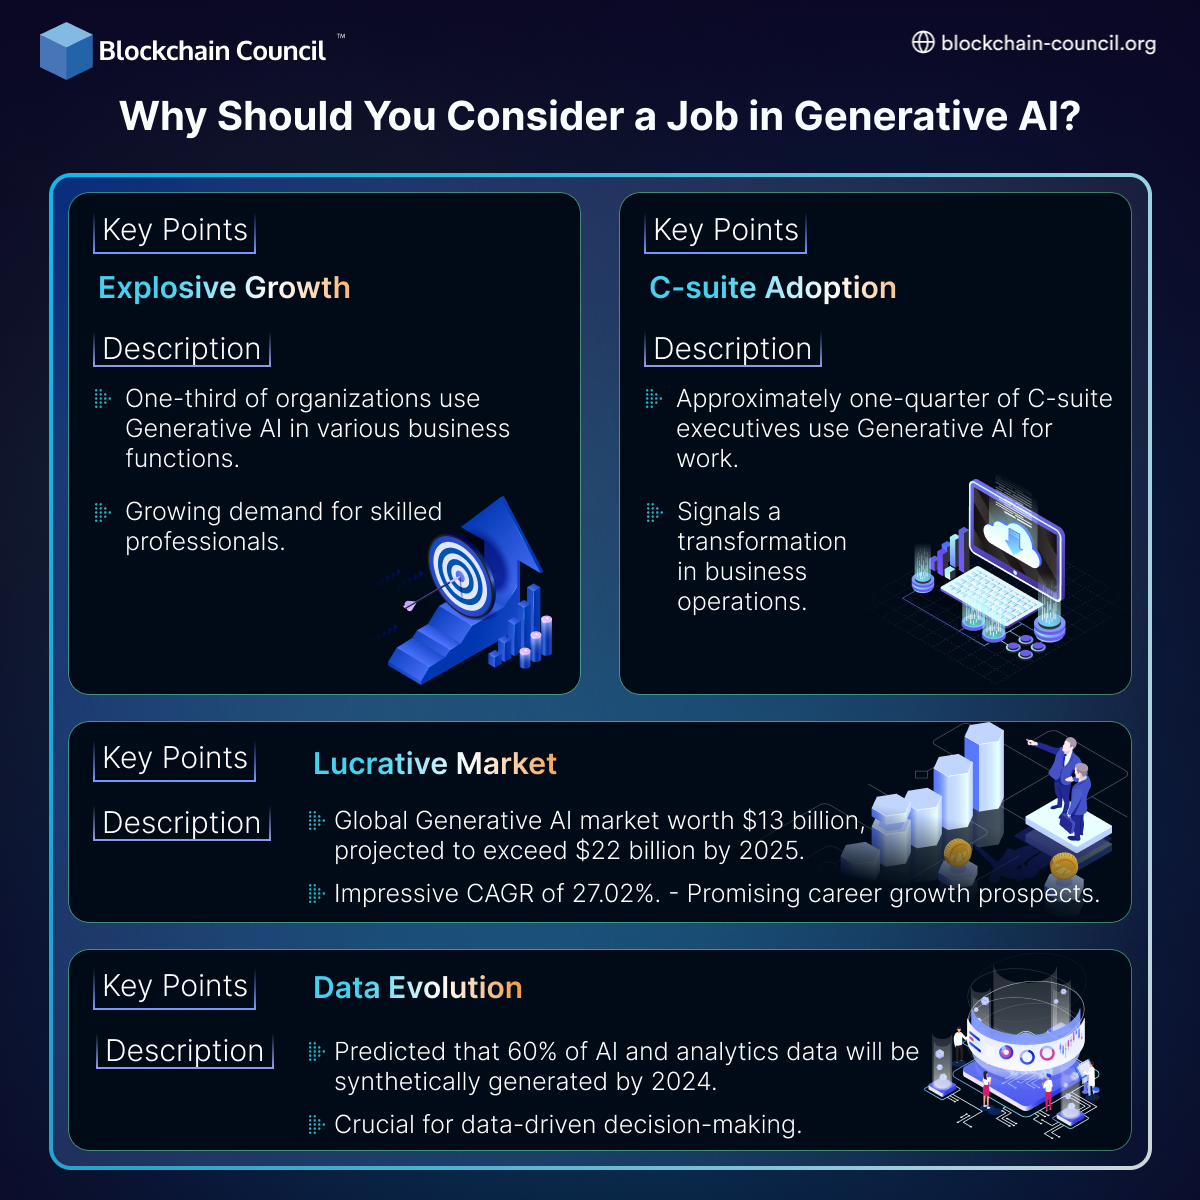 Why Should You Consider a Job in Generative AI?